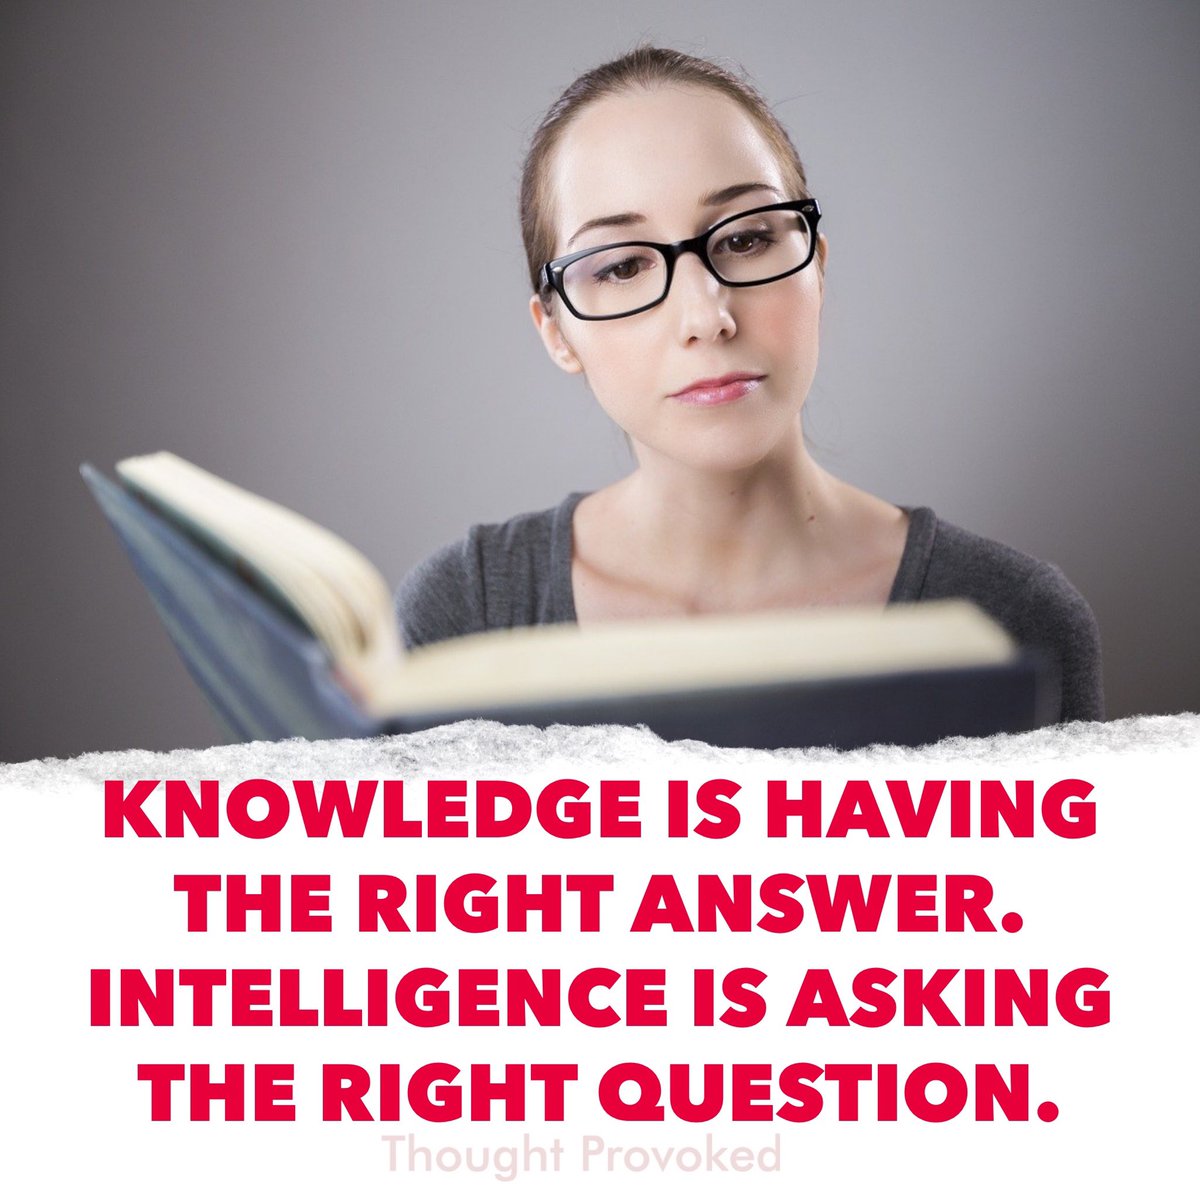 Knowledge is having the right answer. Intelligence is asking the right question. #quote #IQRTG